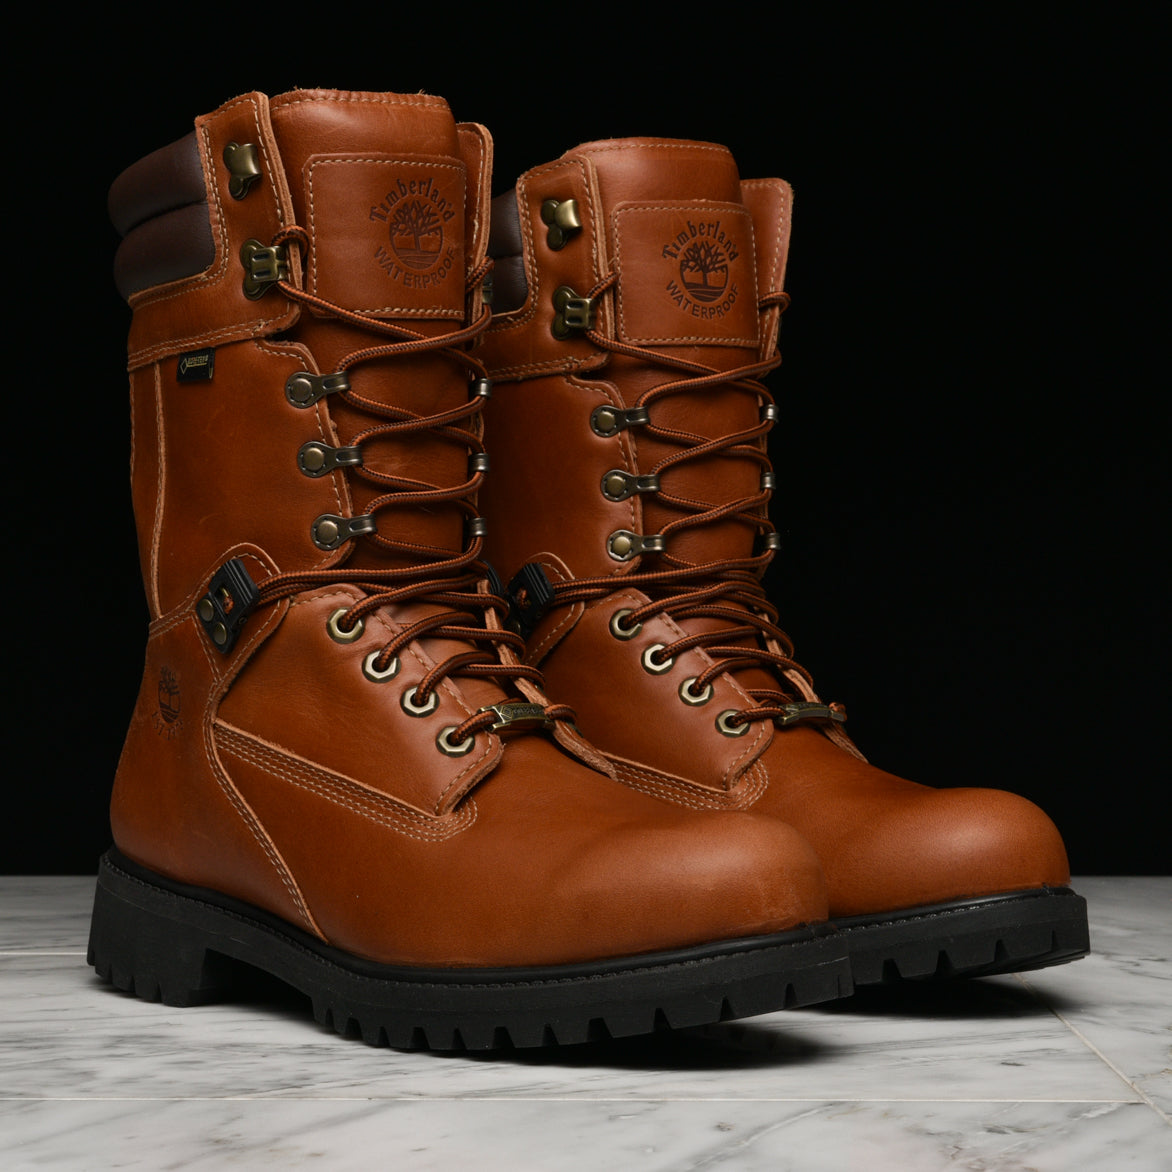 SPECIAL RELEASE WINTER EXTREME GTX 8" BOOT - MEDIUM BROWN